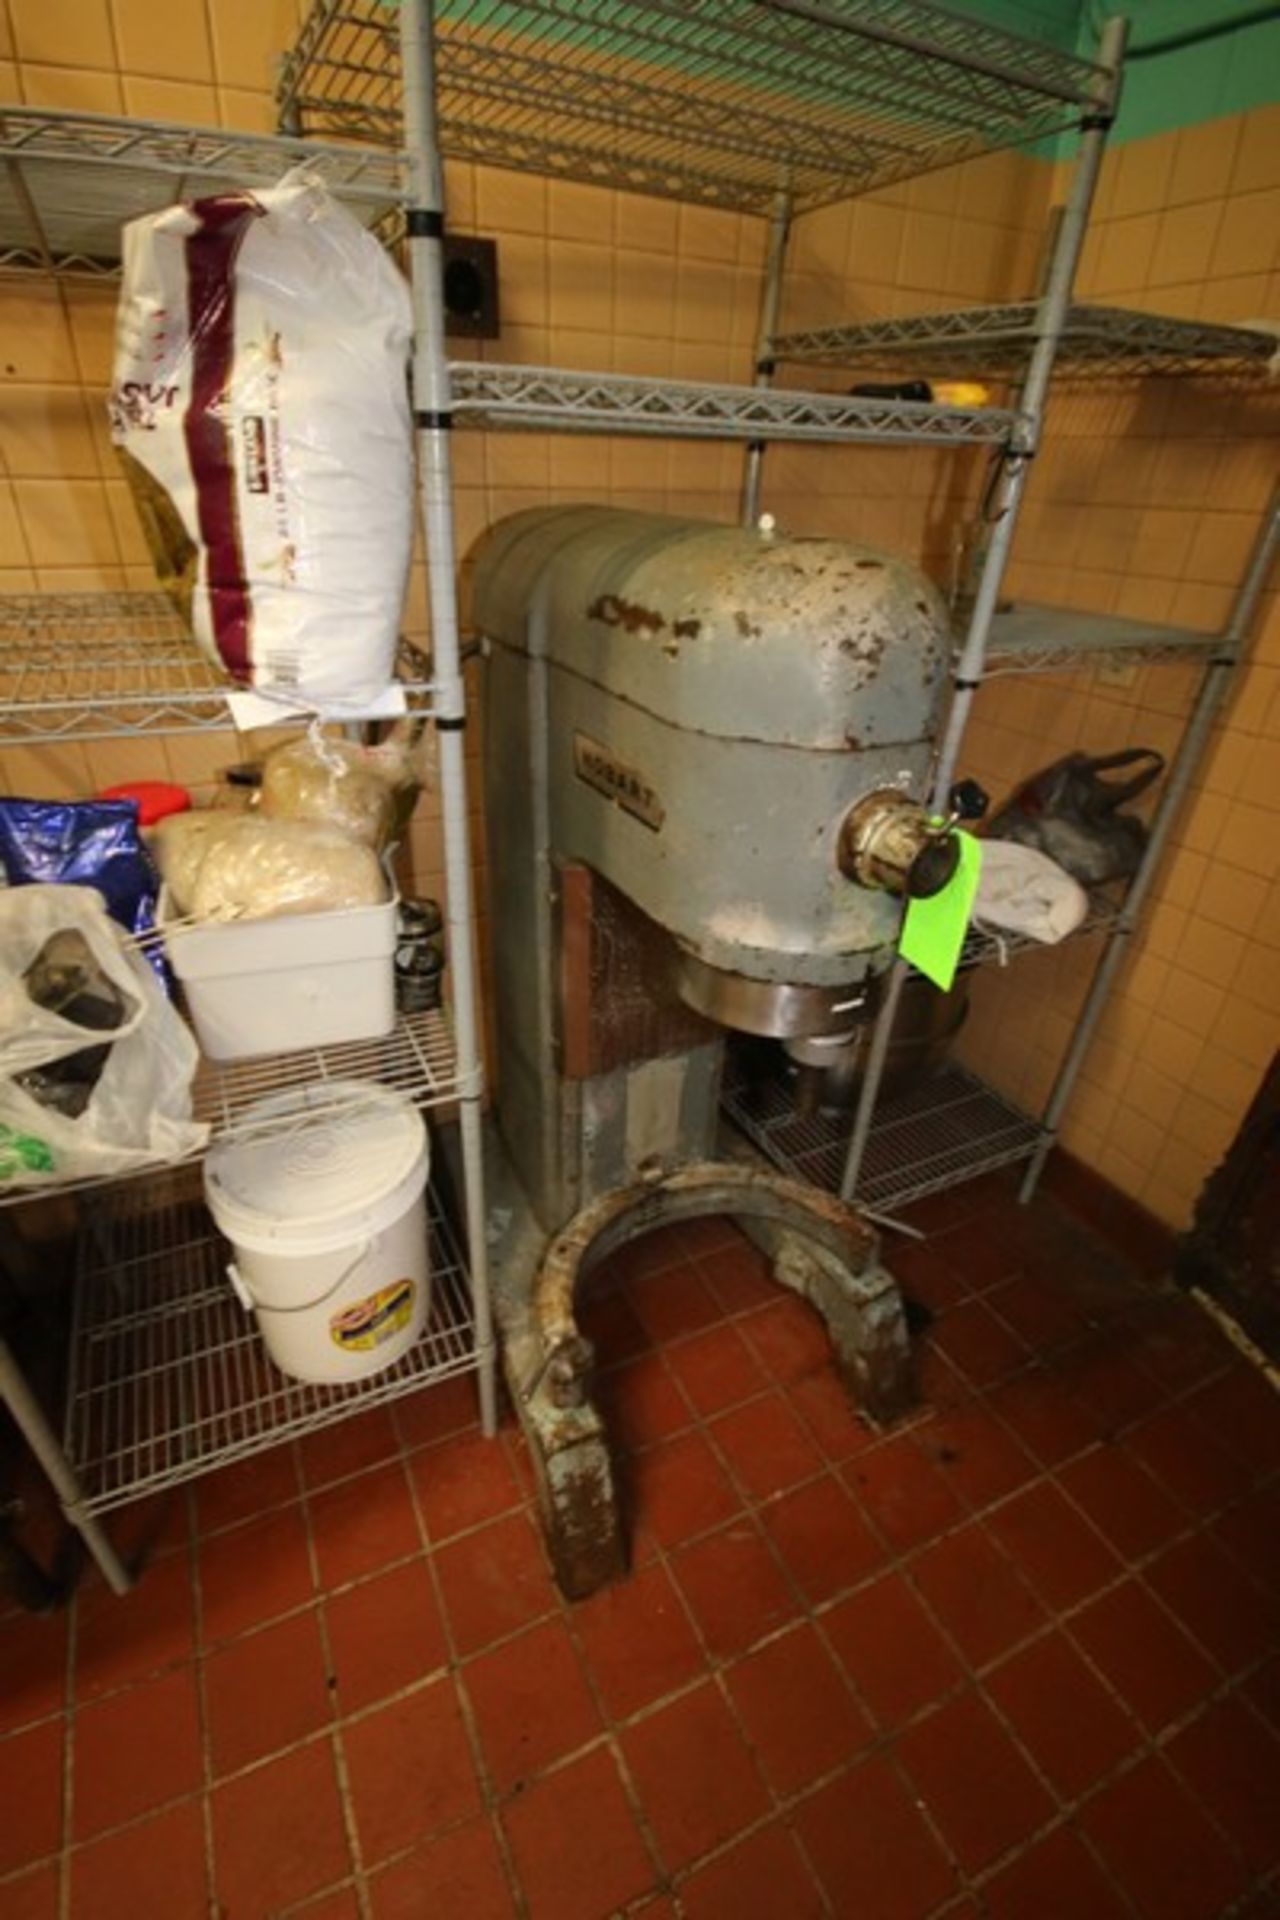 Hobart Commercial Mixer, M/N H-600, S/N 11-070-743, 208 Volts, 3 Phase, with S/S Mixing Bowl ( - Image 2 of 6